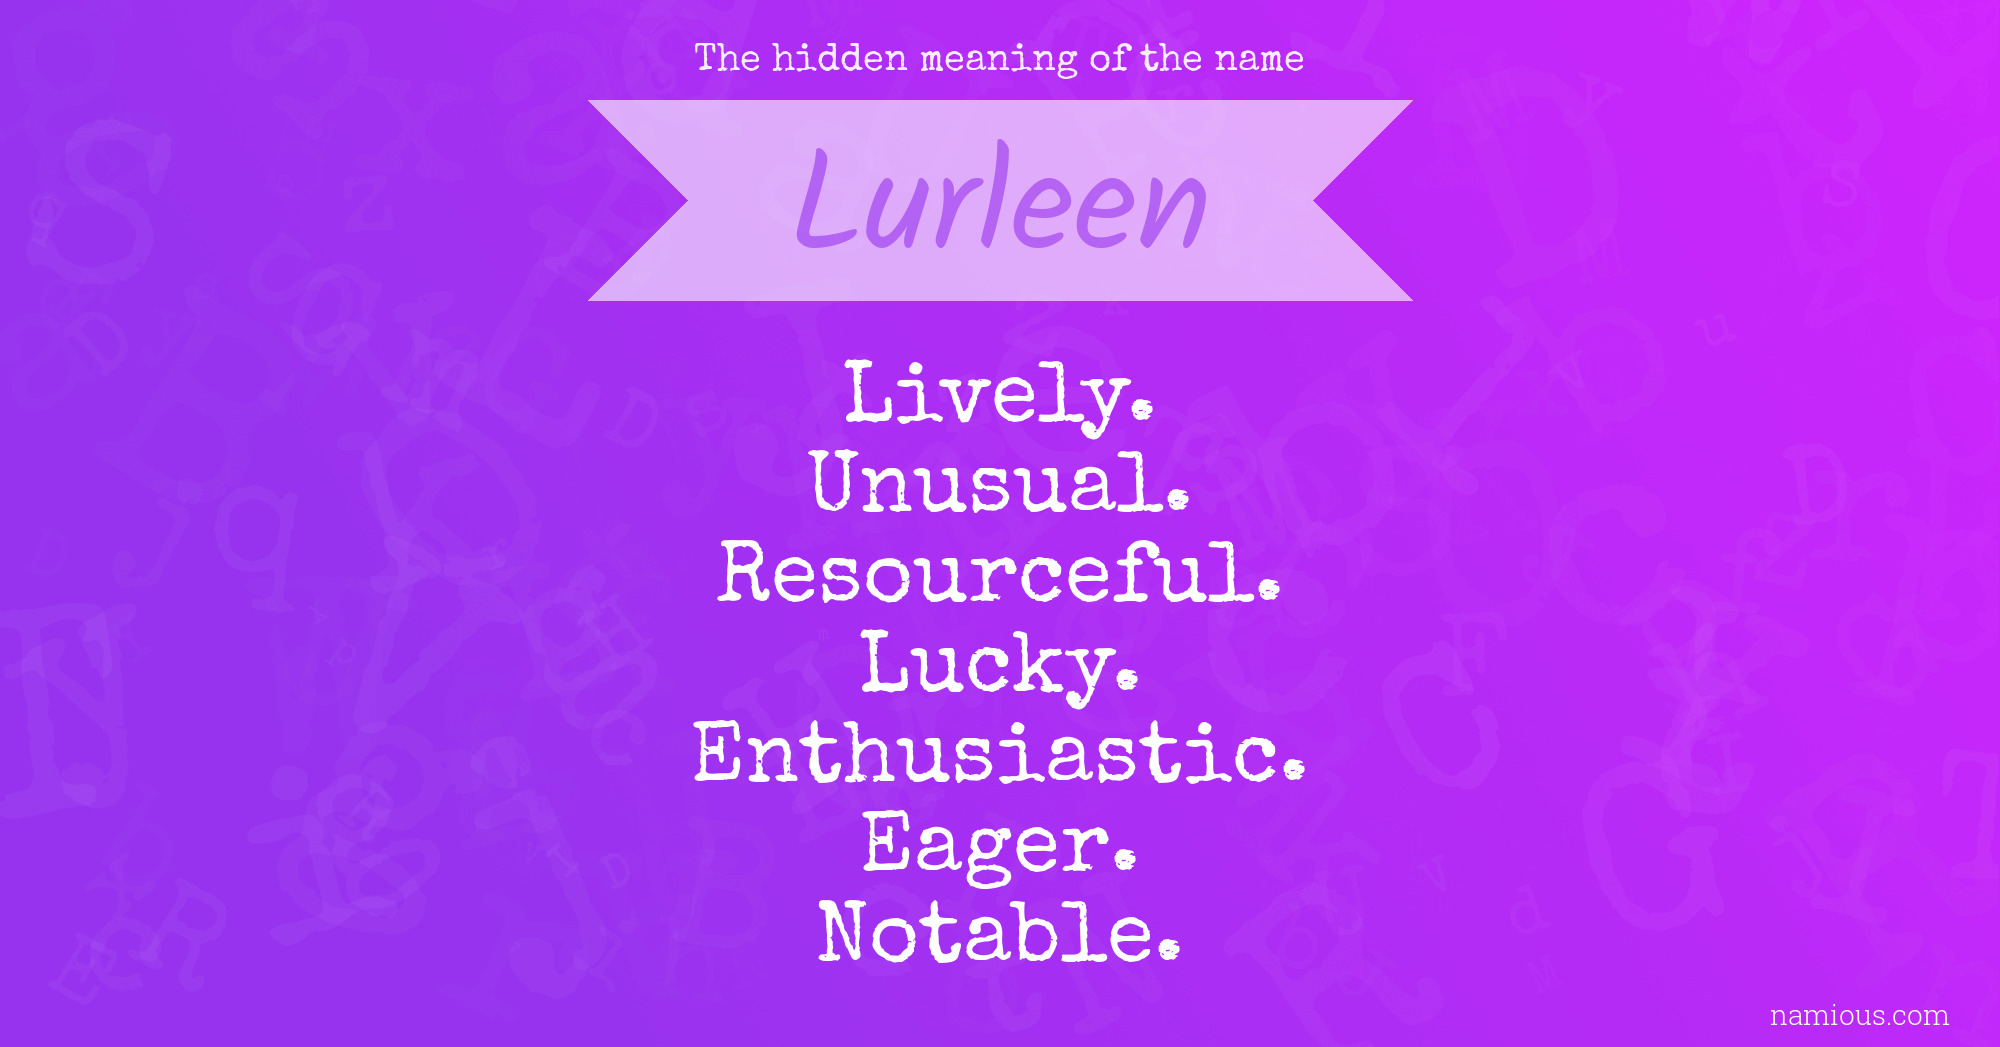 The hidden meaning of the name Lurleen